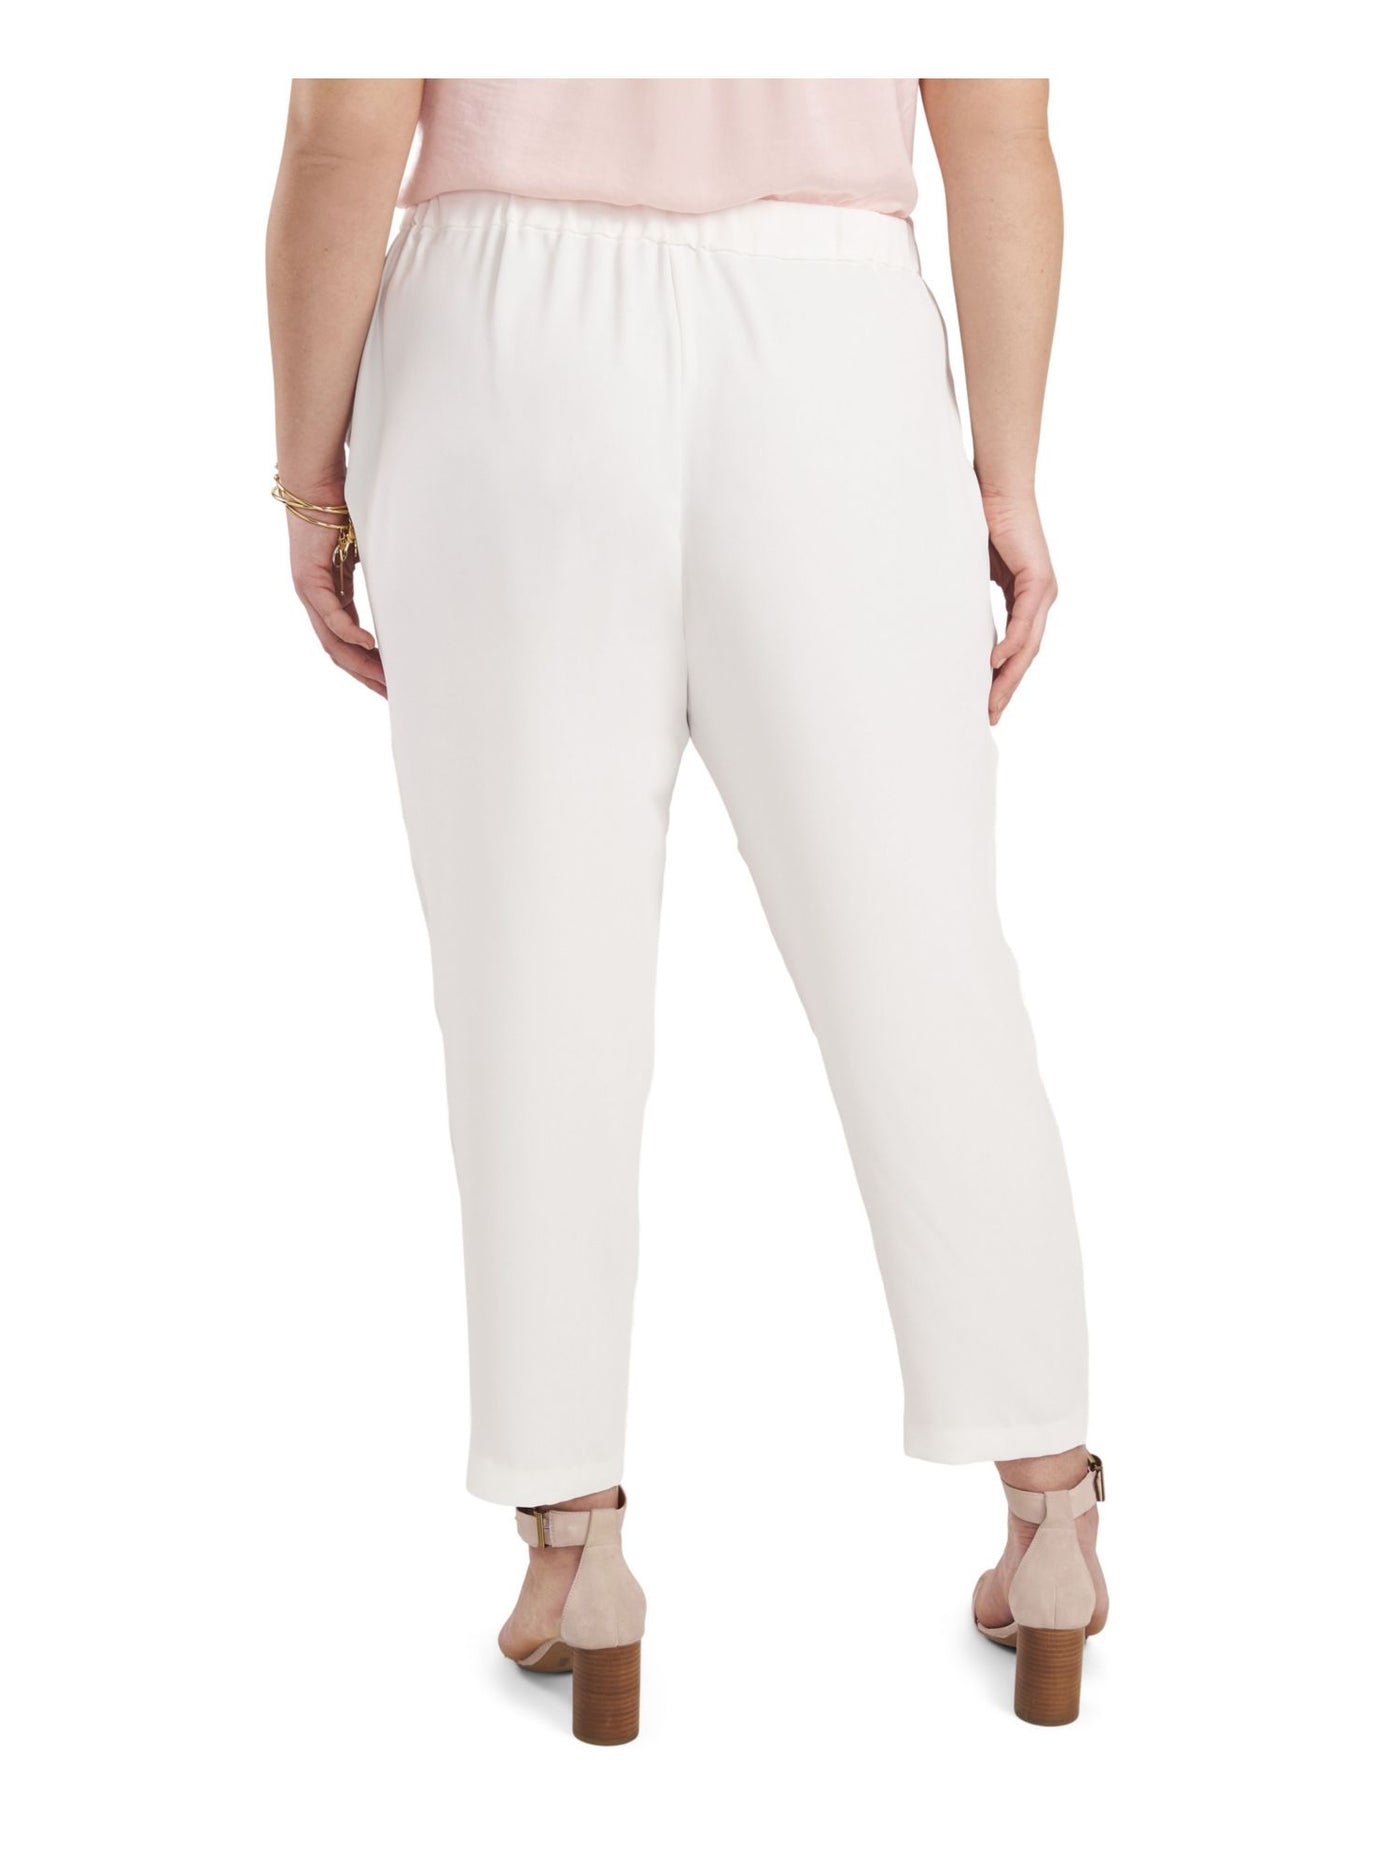 VINCE CAMUTO Womens White Stretch Pocketed Pull On Wear To Work Straight leg Pants Plus 2X